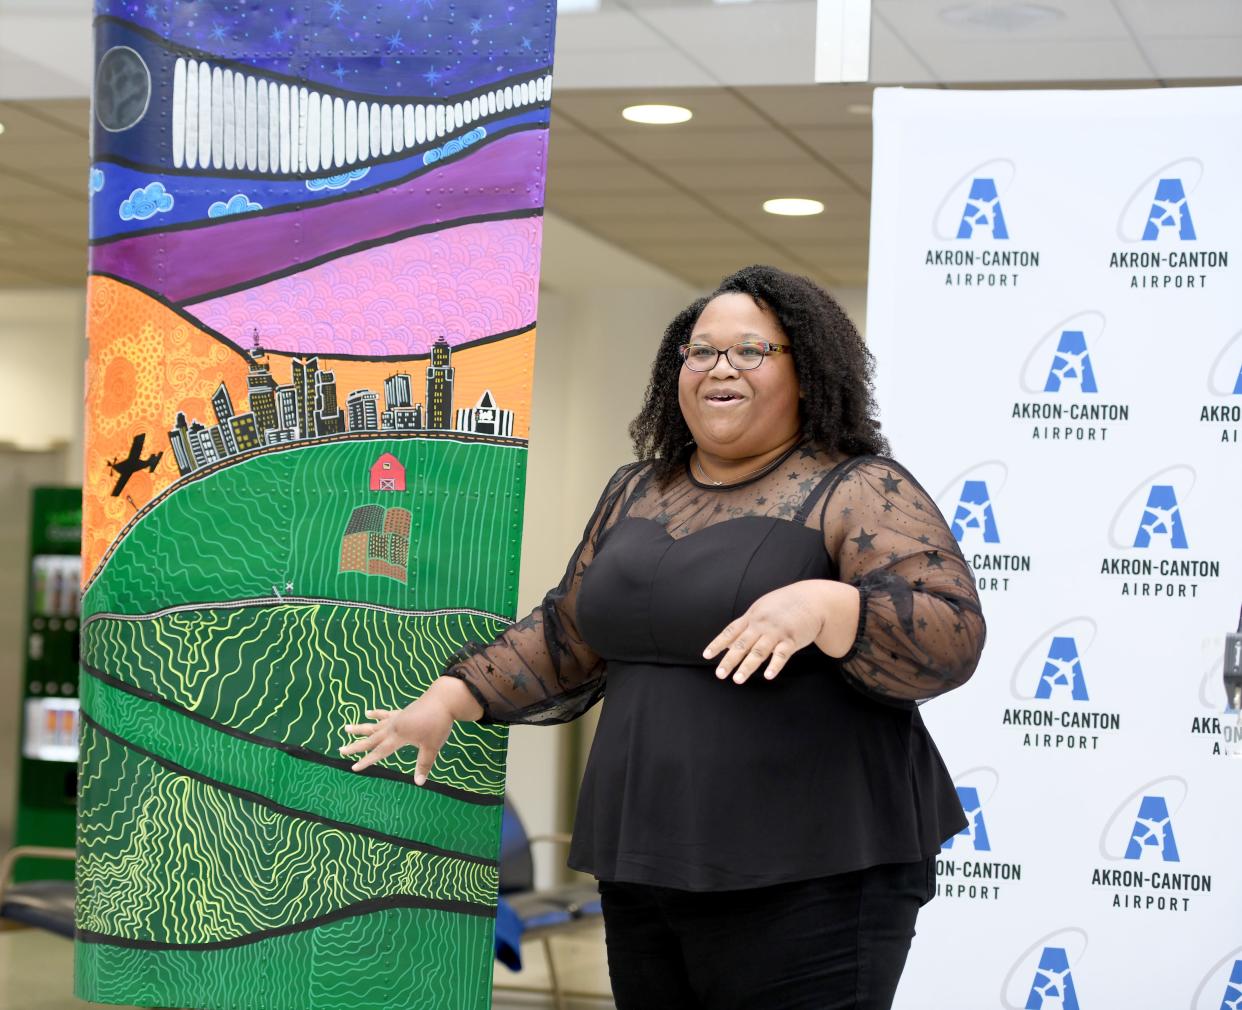 Artist Jessica Travis of Akron talks about the inspiration behind her piece during the unveiling of Wing Art at the Akron-Canton Airport.